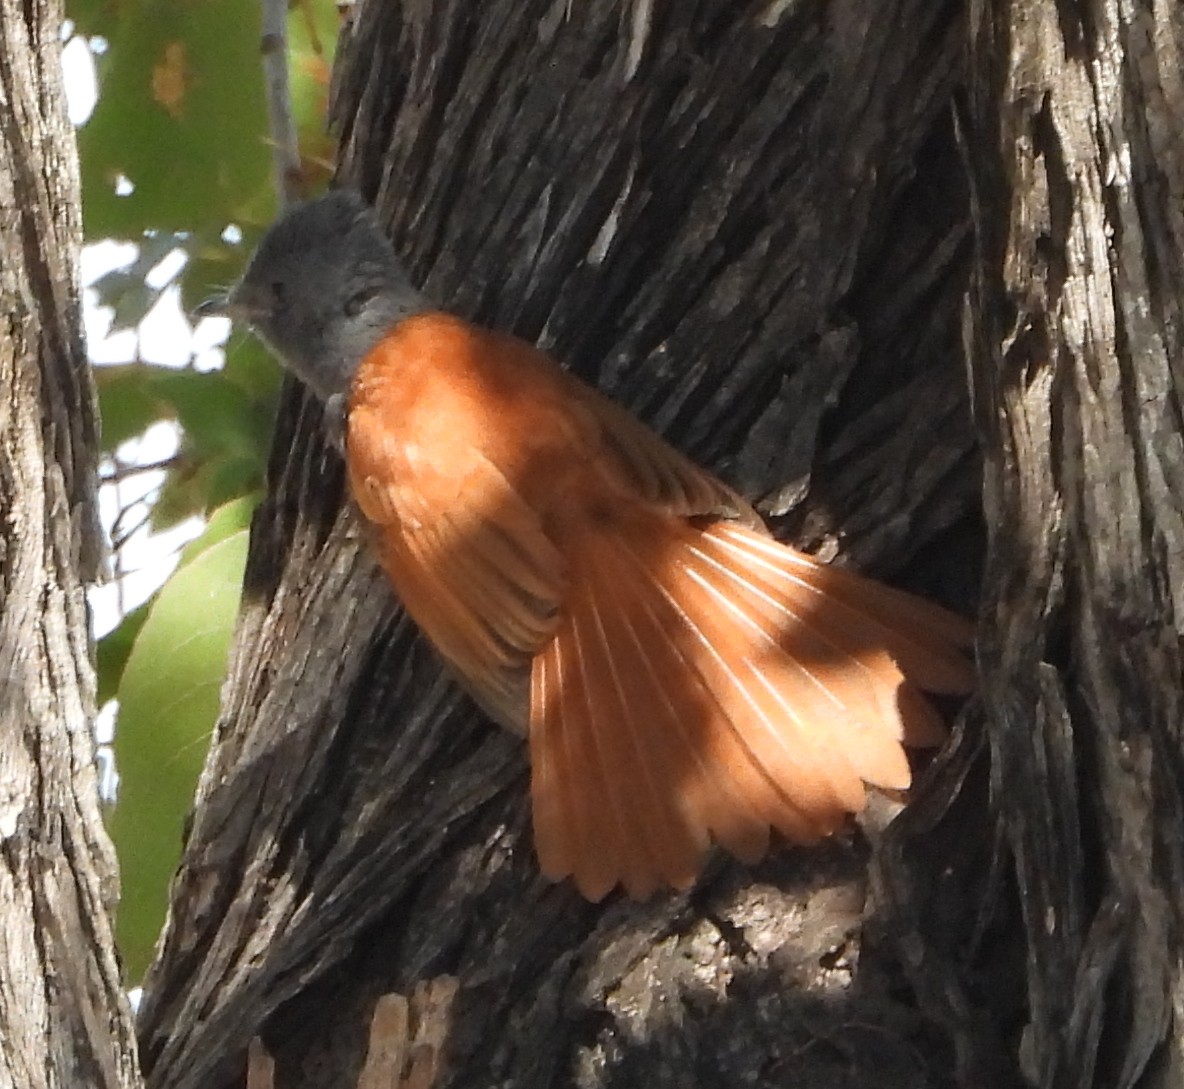 African Paradise-Flycatcher - Timothy Whitehead